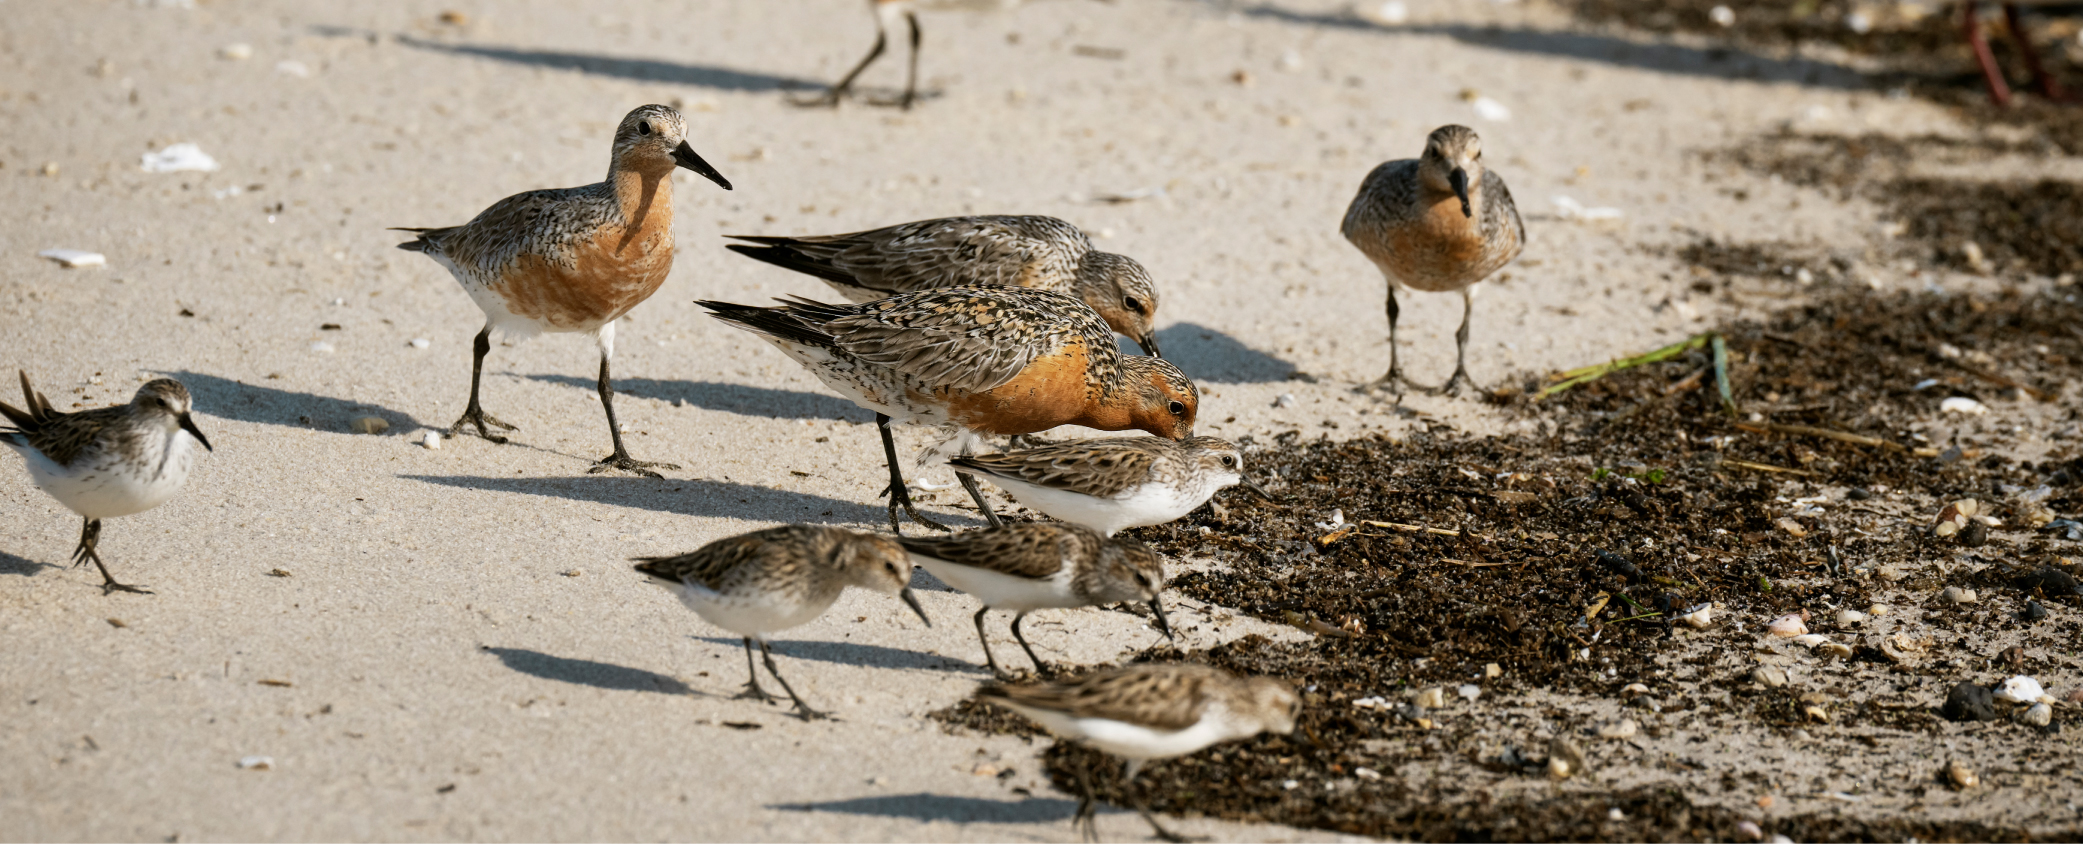 Redknot birds on the sand at the water's edge.